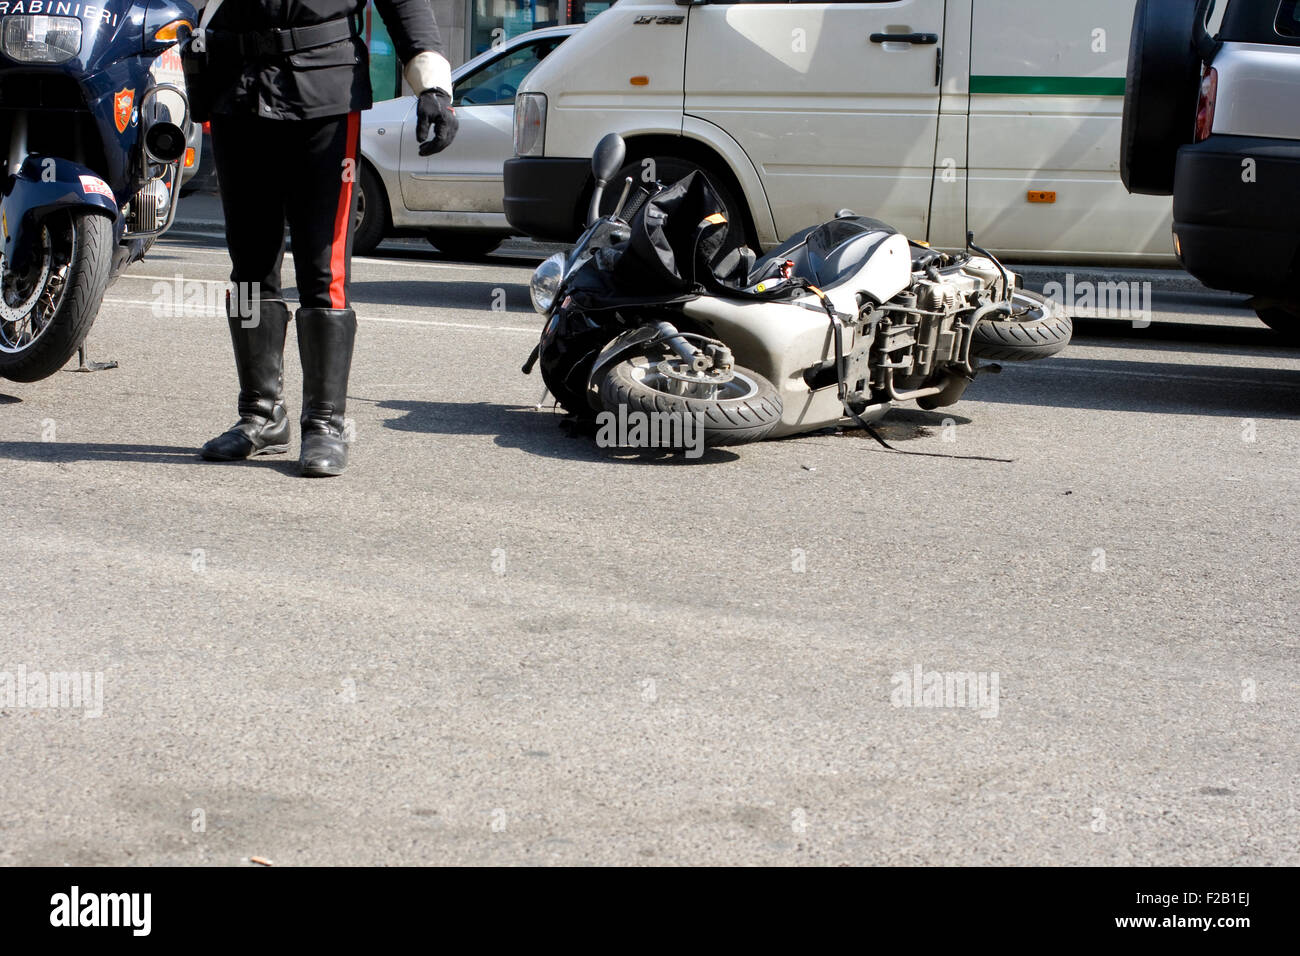 Scooter crash in the urban street Stock Photo